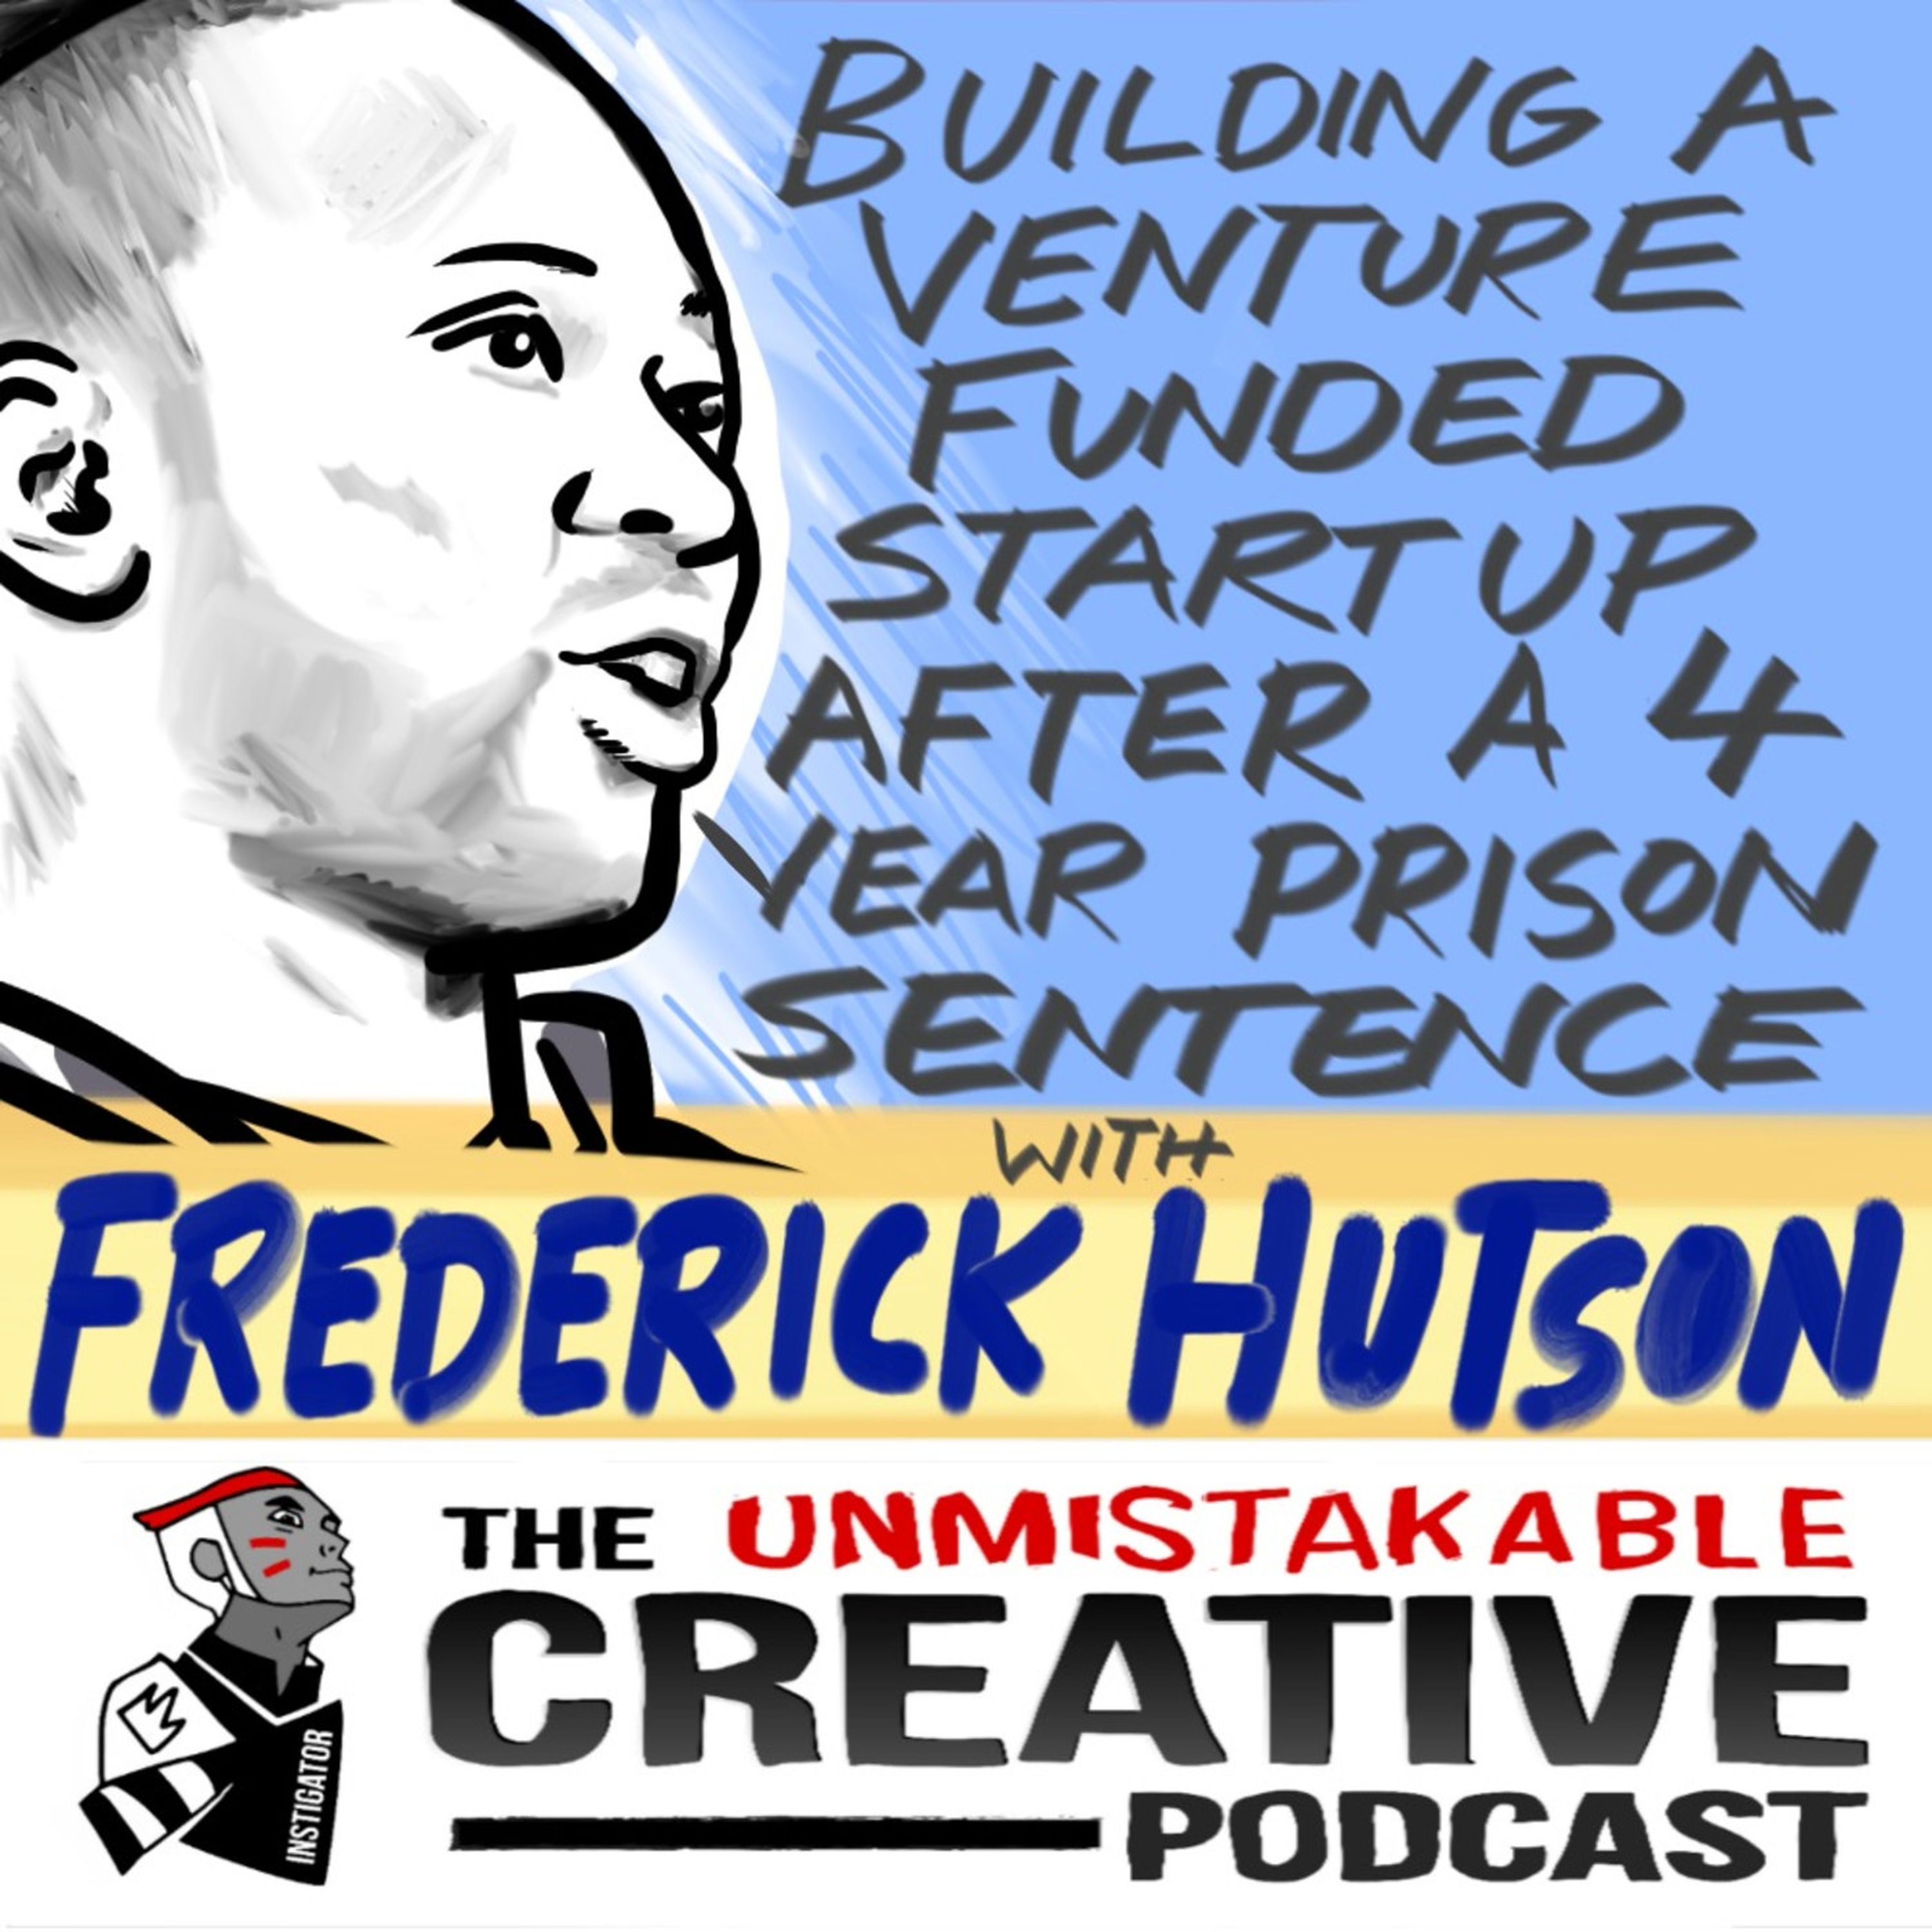 Building a Venture Funded Startup after a Four Year Prison Sentence with Frederick Hutson